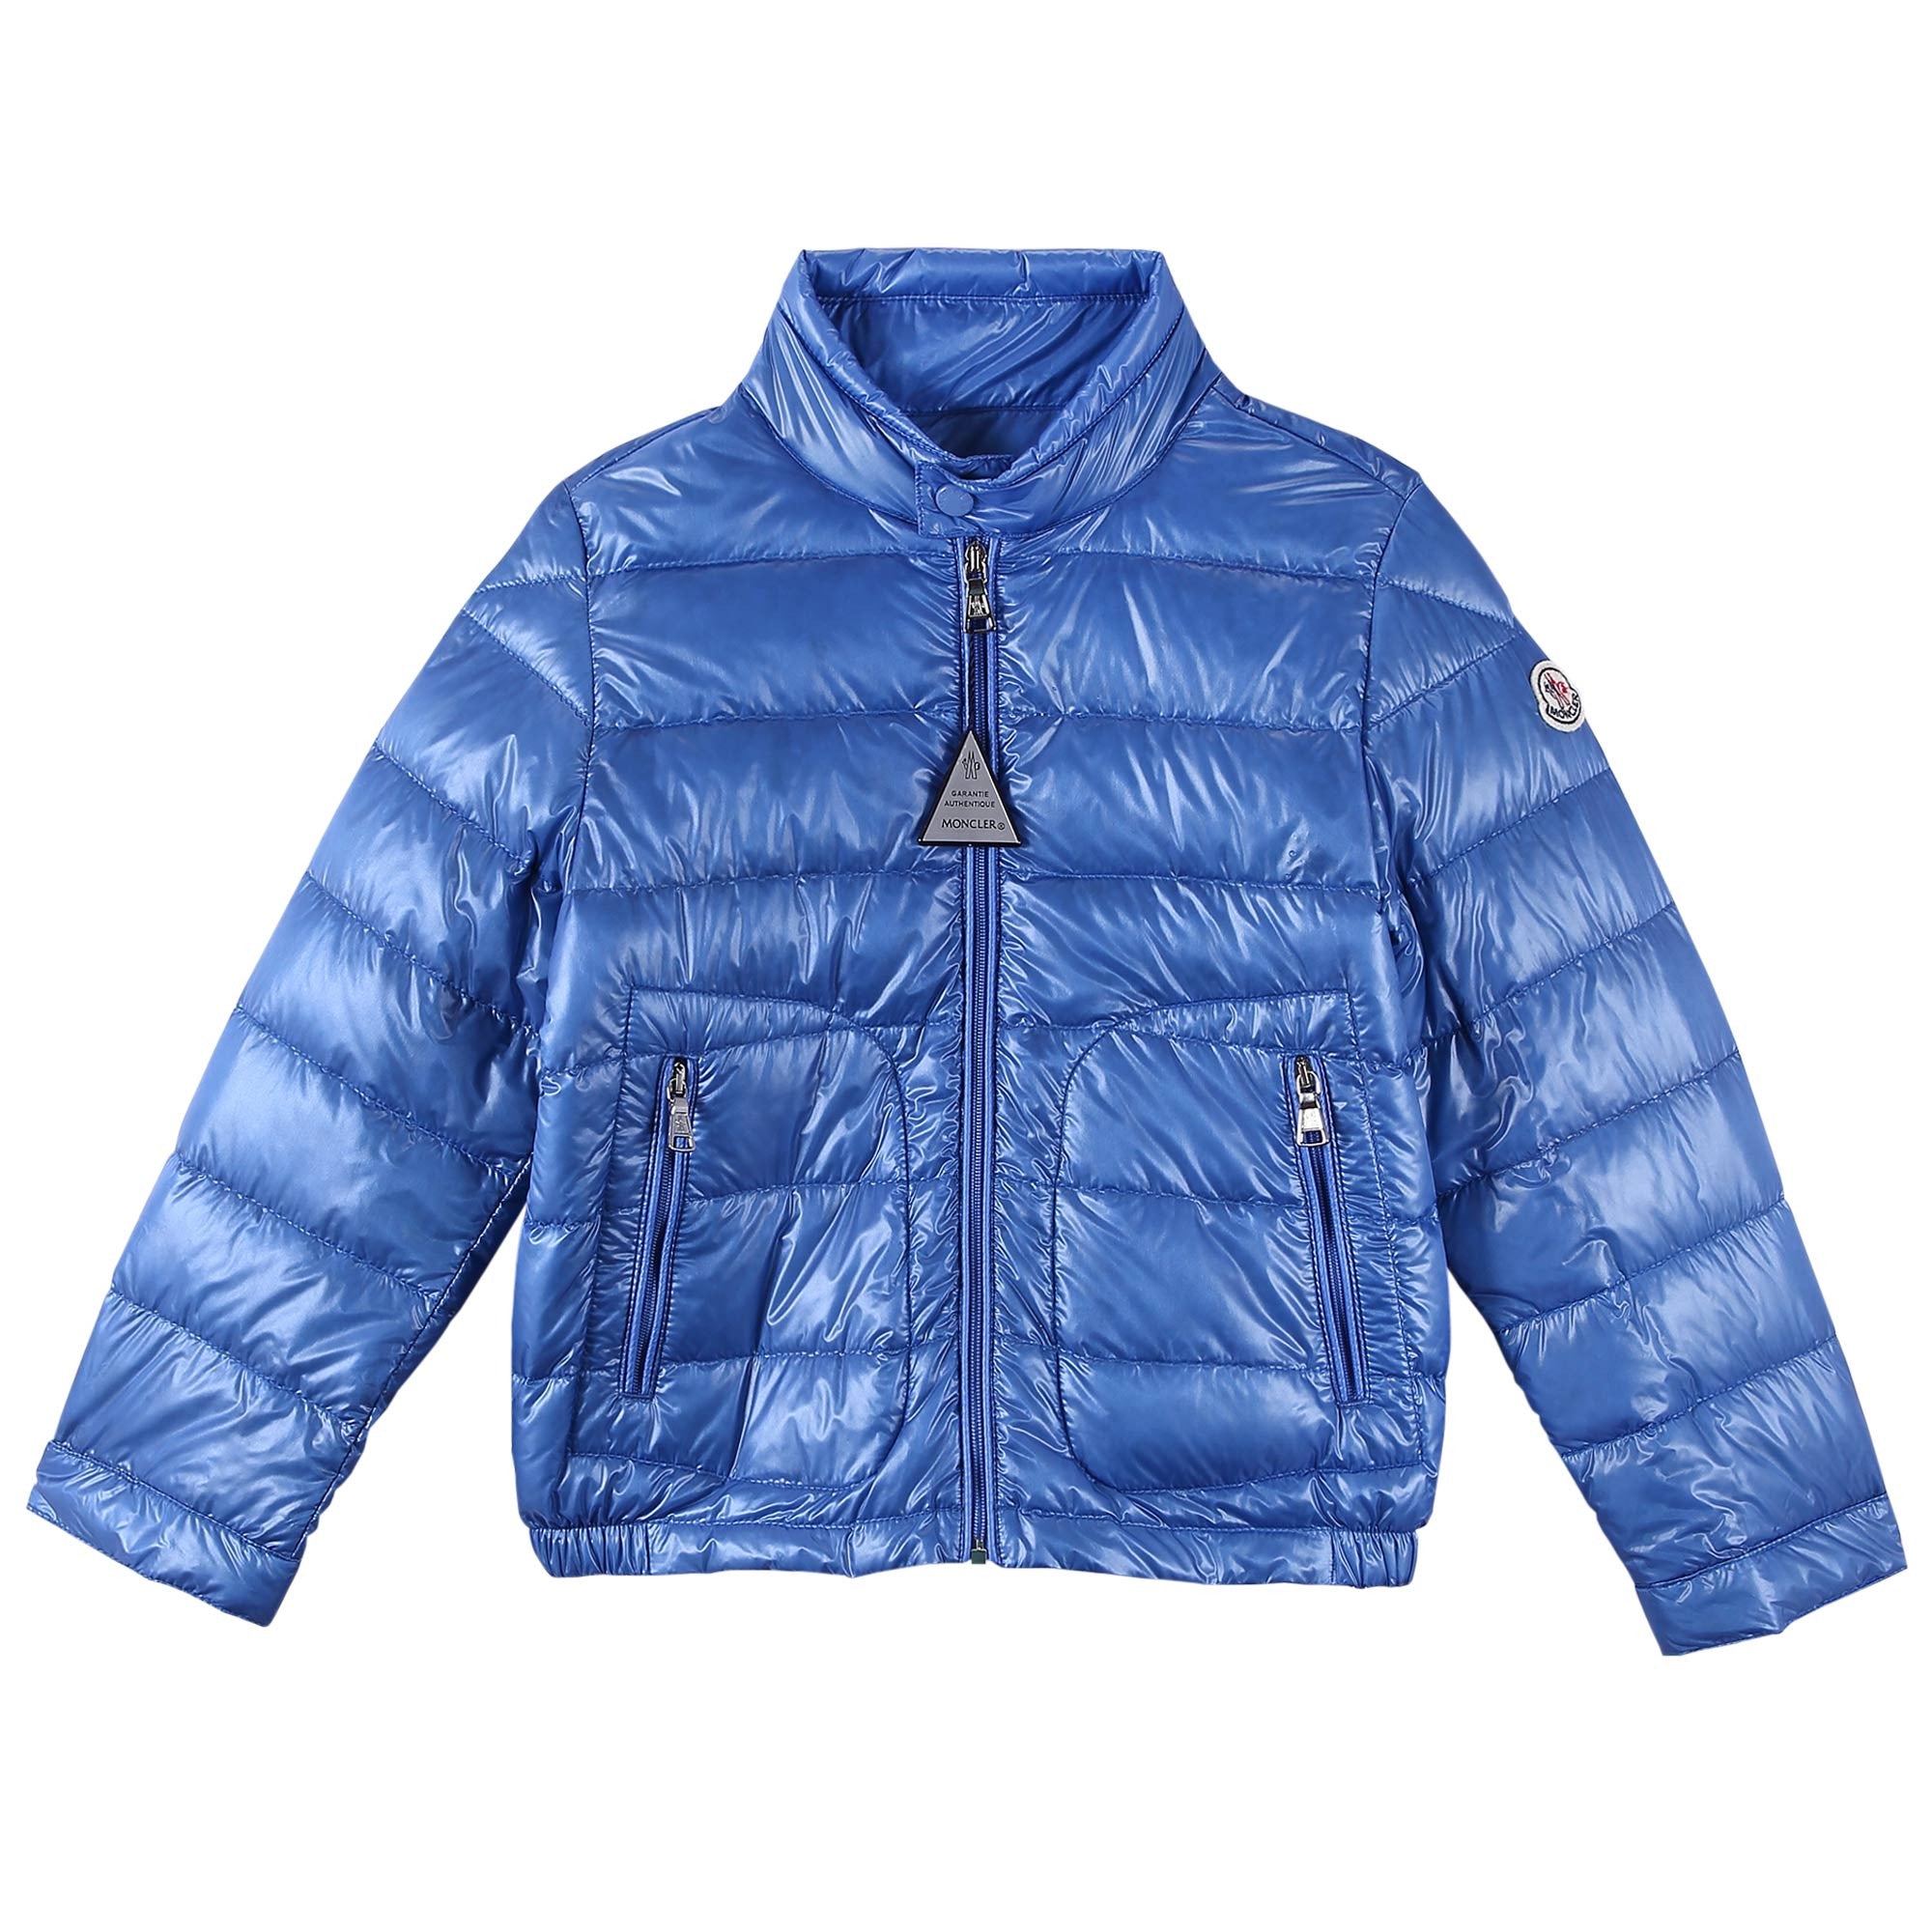 Boys Blue Down Padded 'Acrous' Jacket With Hidden Pocket - CÉMAROSE | Children's Fashion Store - 1